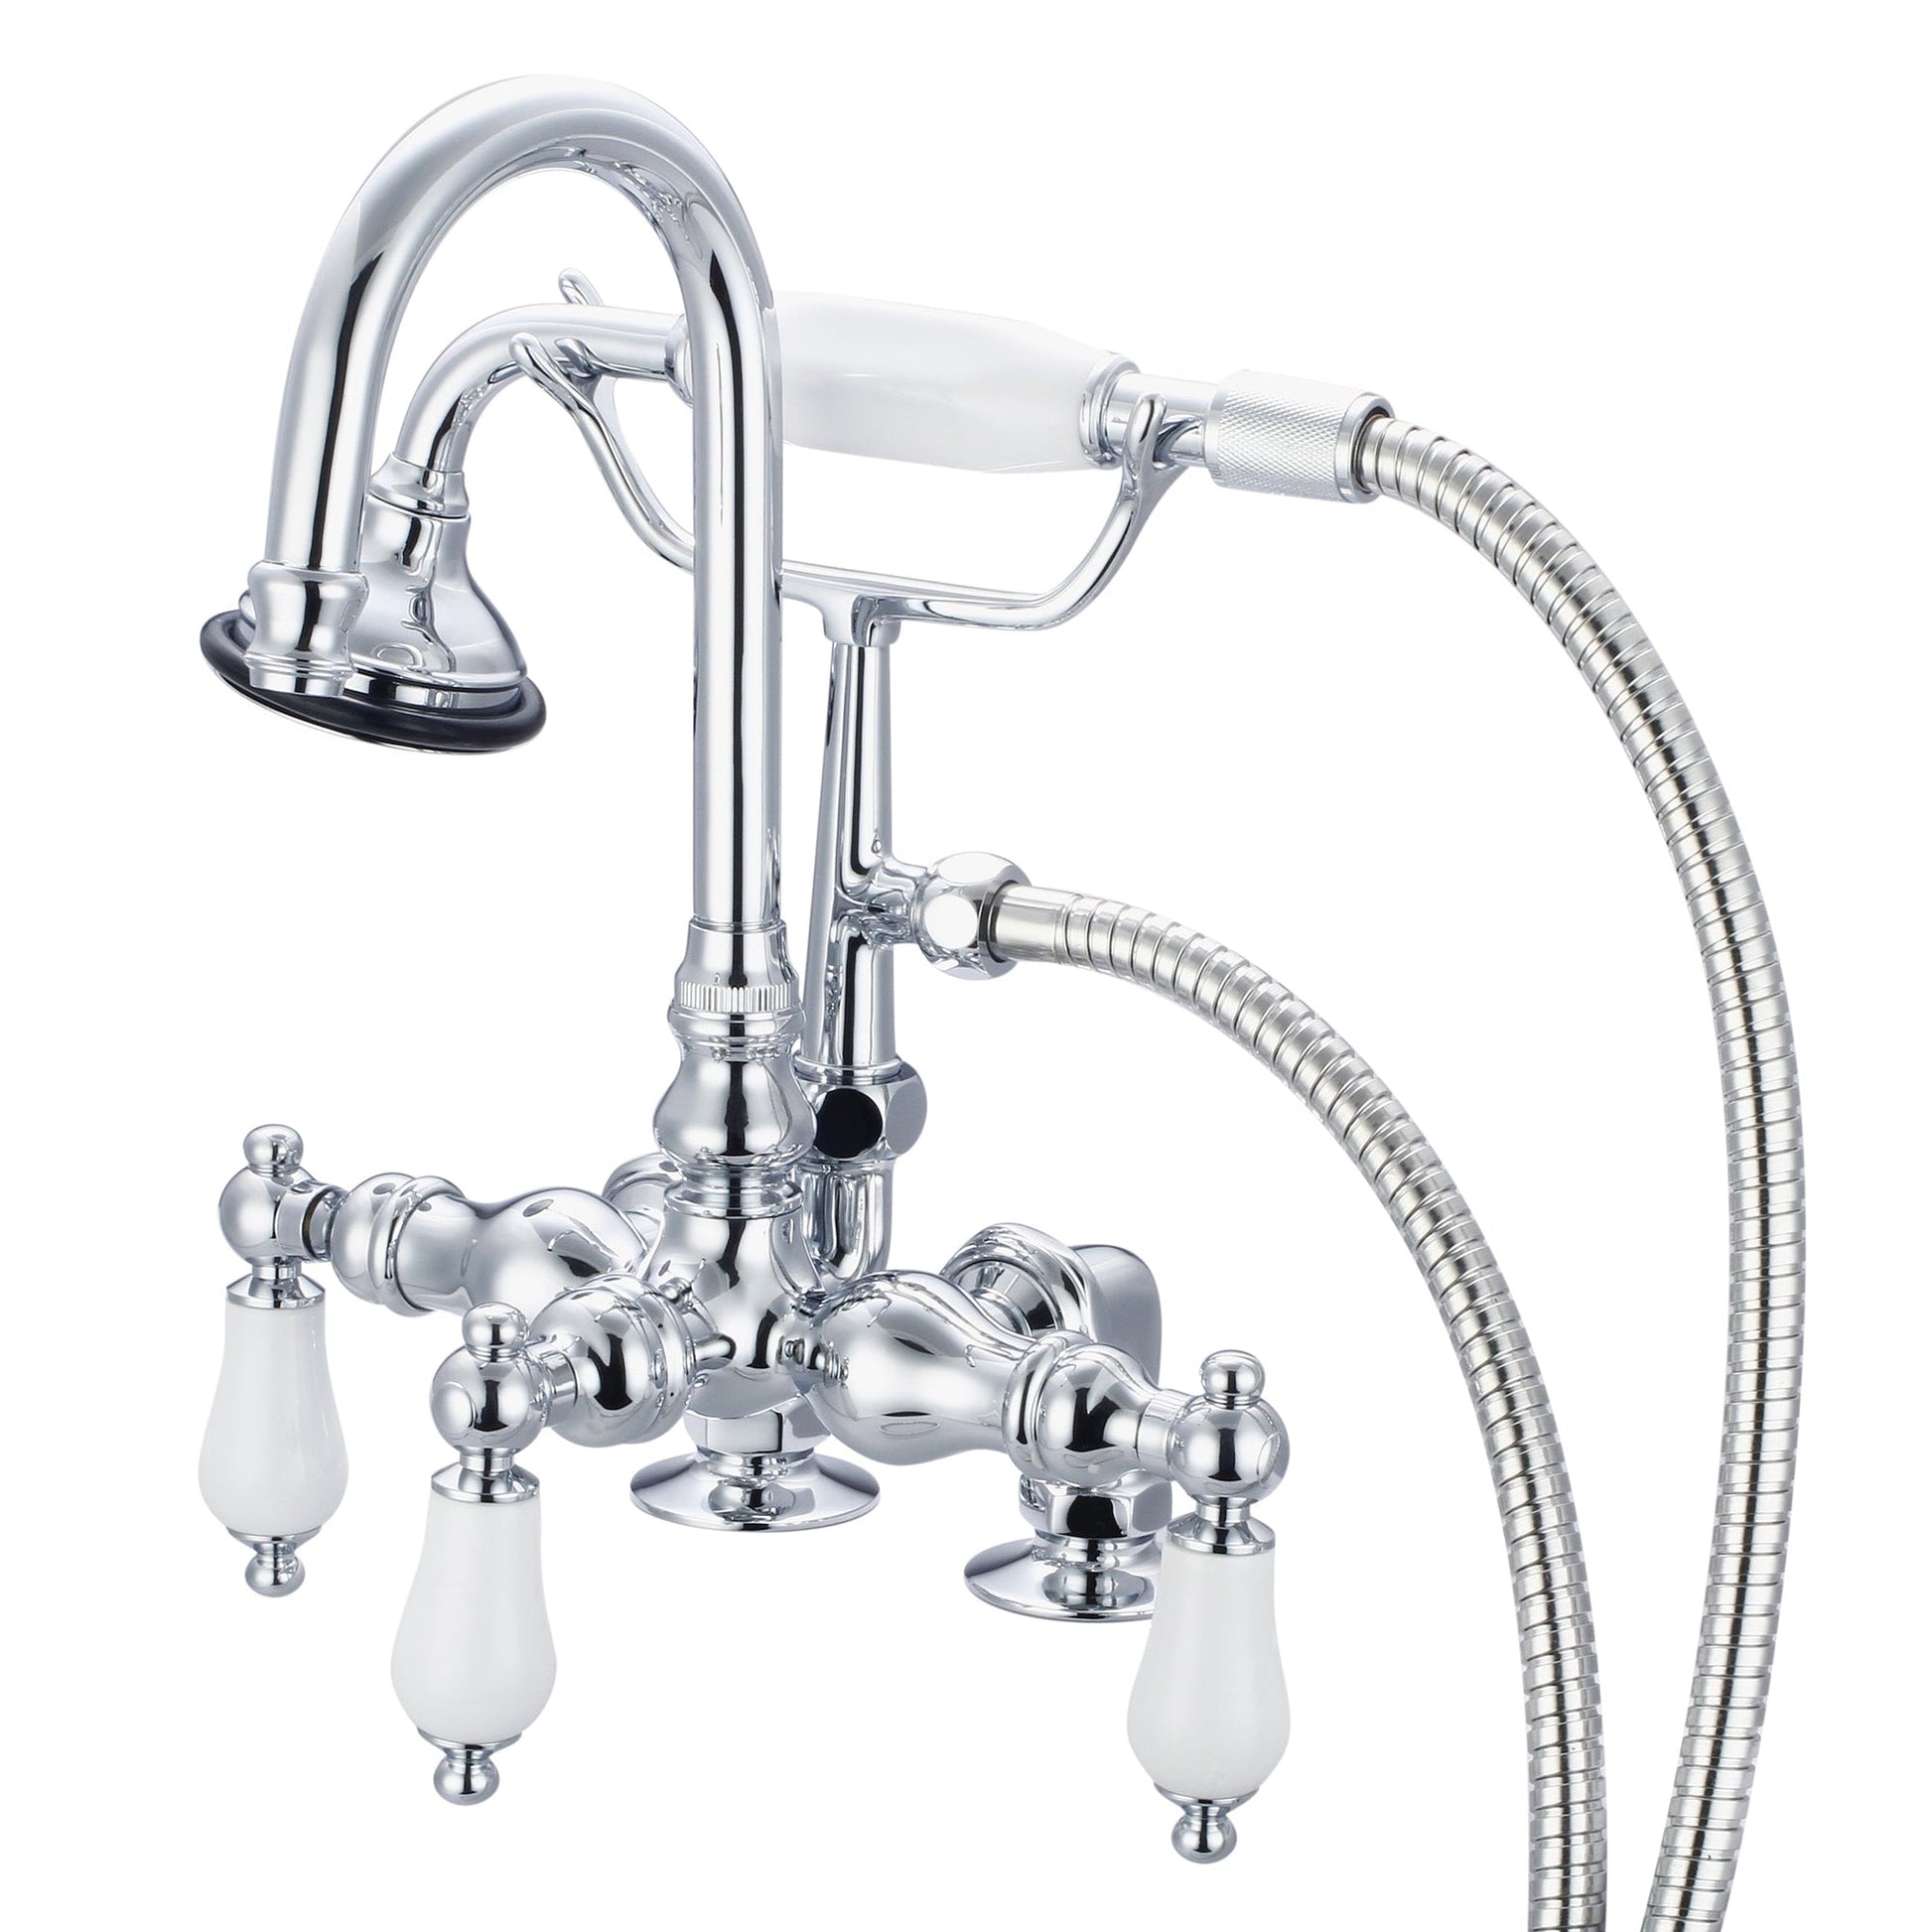 Water Creation Vintage Classic Center Deck Mount Tub F6-0013 9.25" Silver Solid Brass Faucet With Gooseneck Spout, 2-Inch Risers And Handheld Shower And Porcelain Lever Handles Without Labels